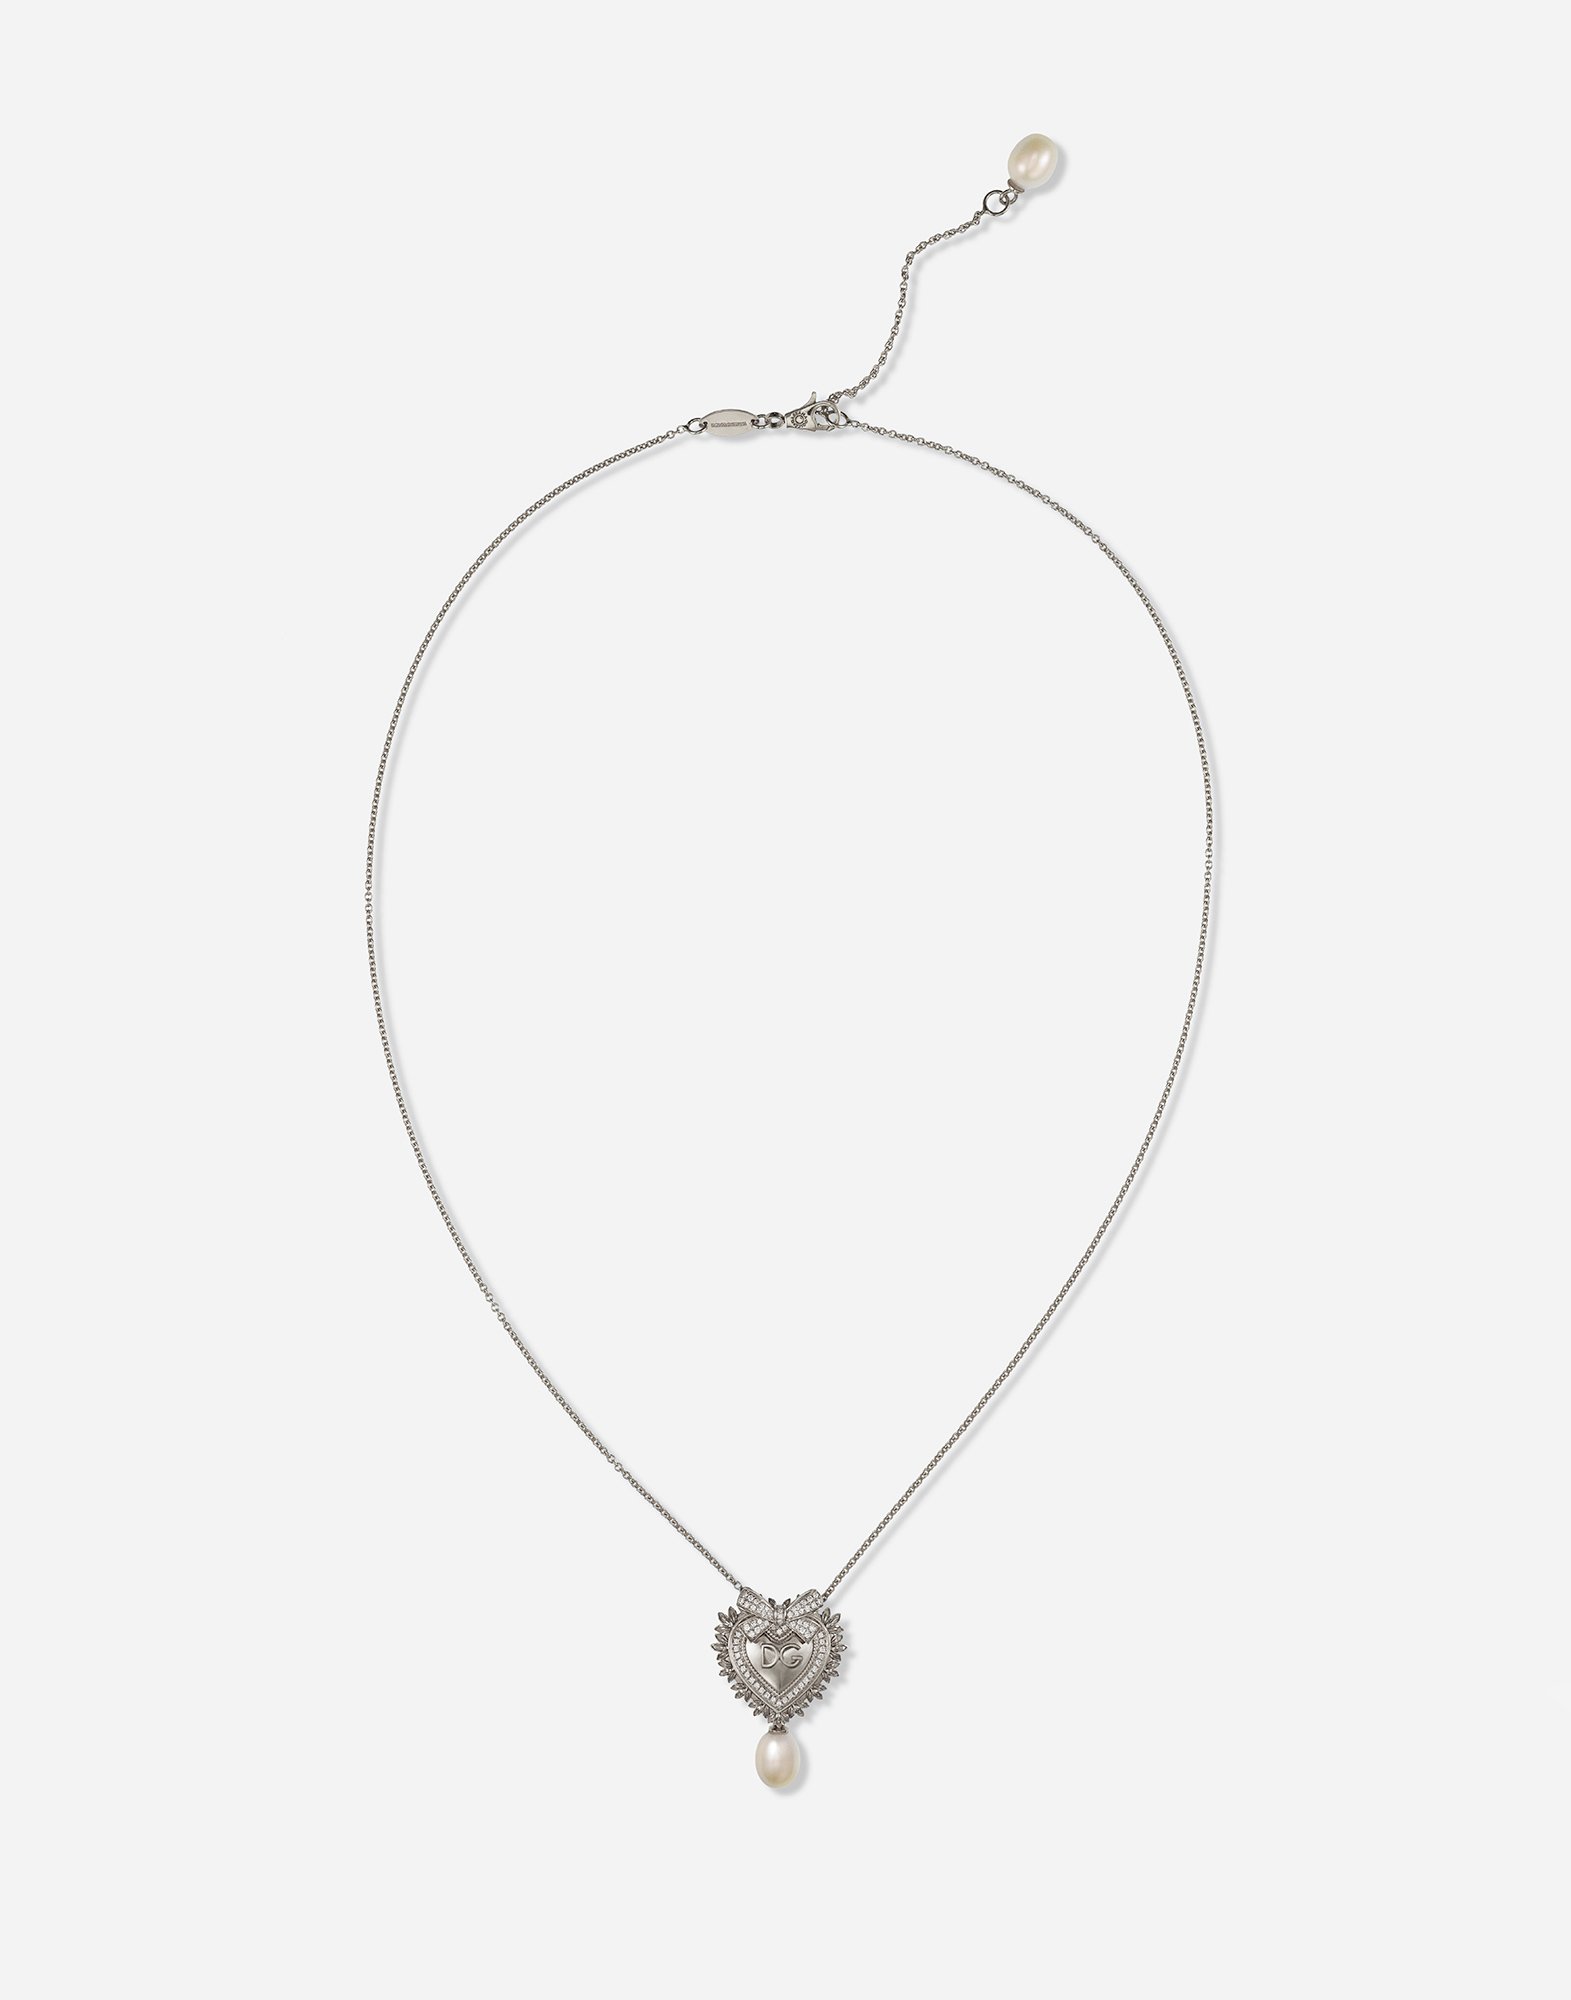 Devotion necklace in white gold with diamonds and pearls in White Gold